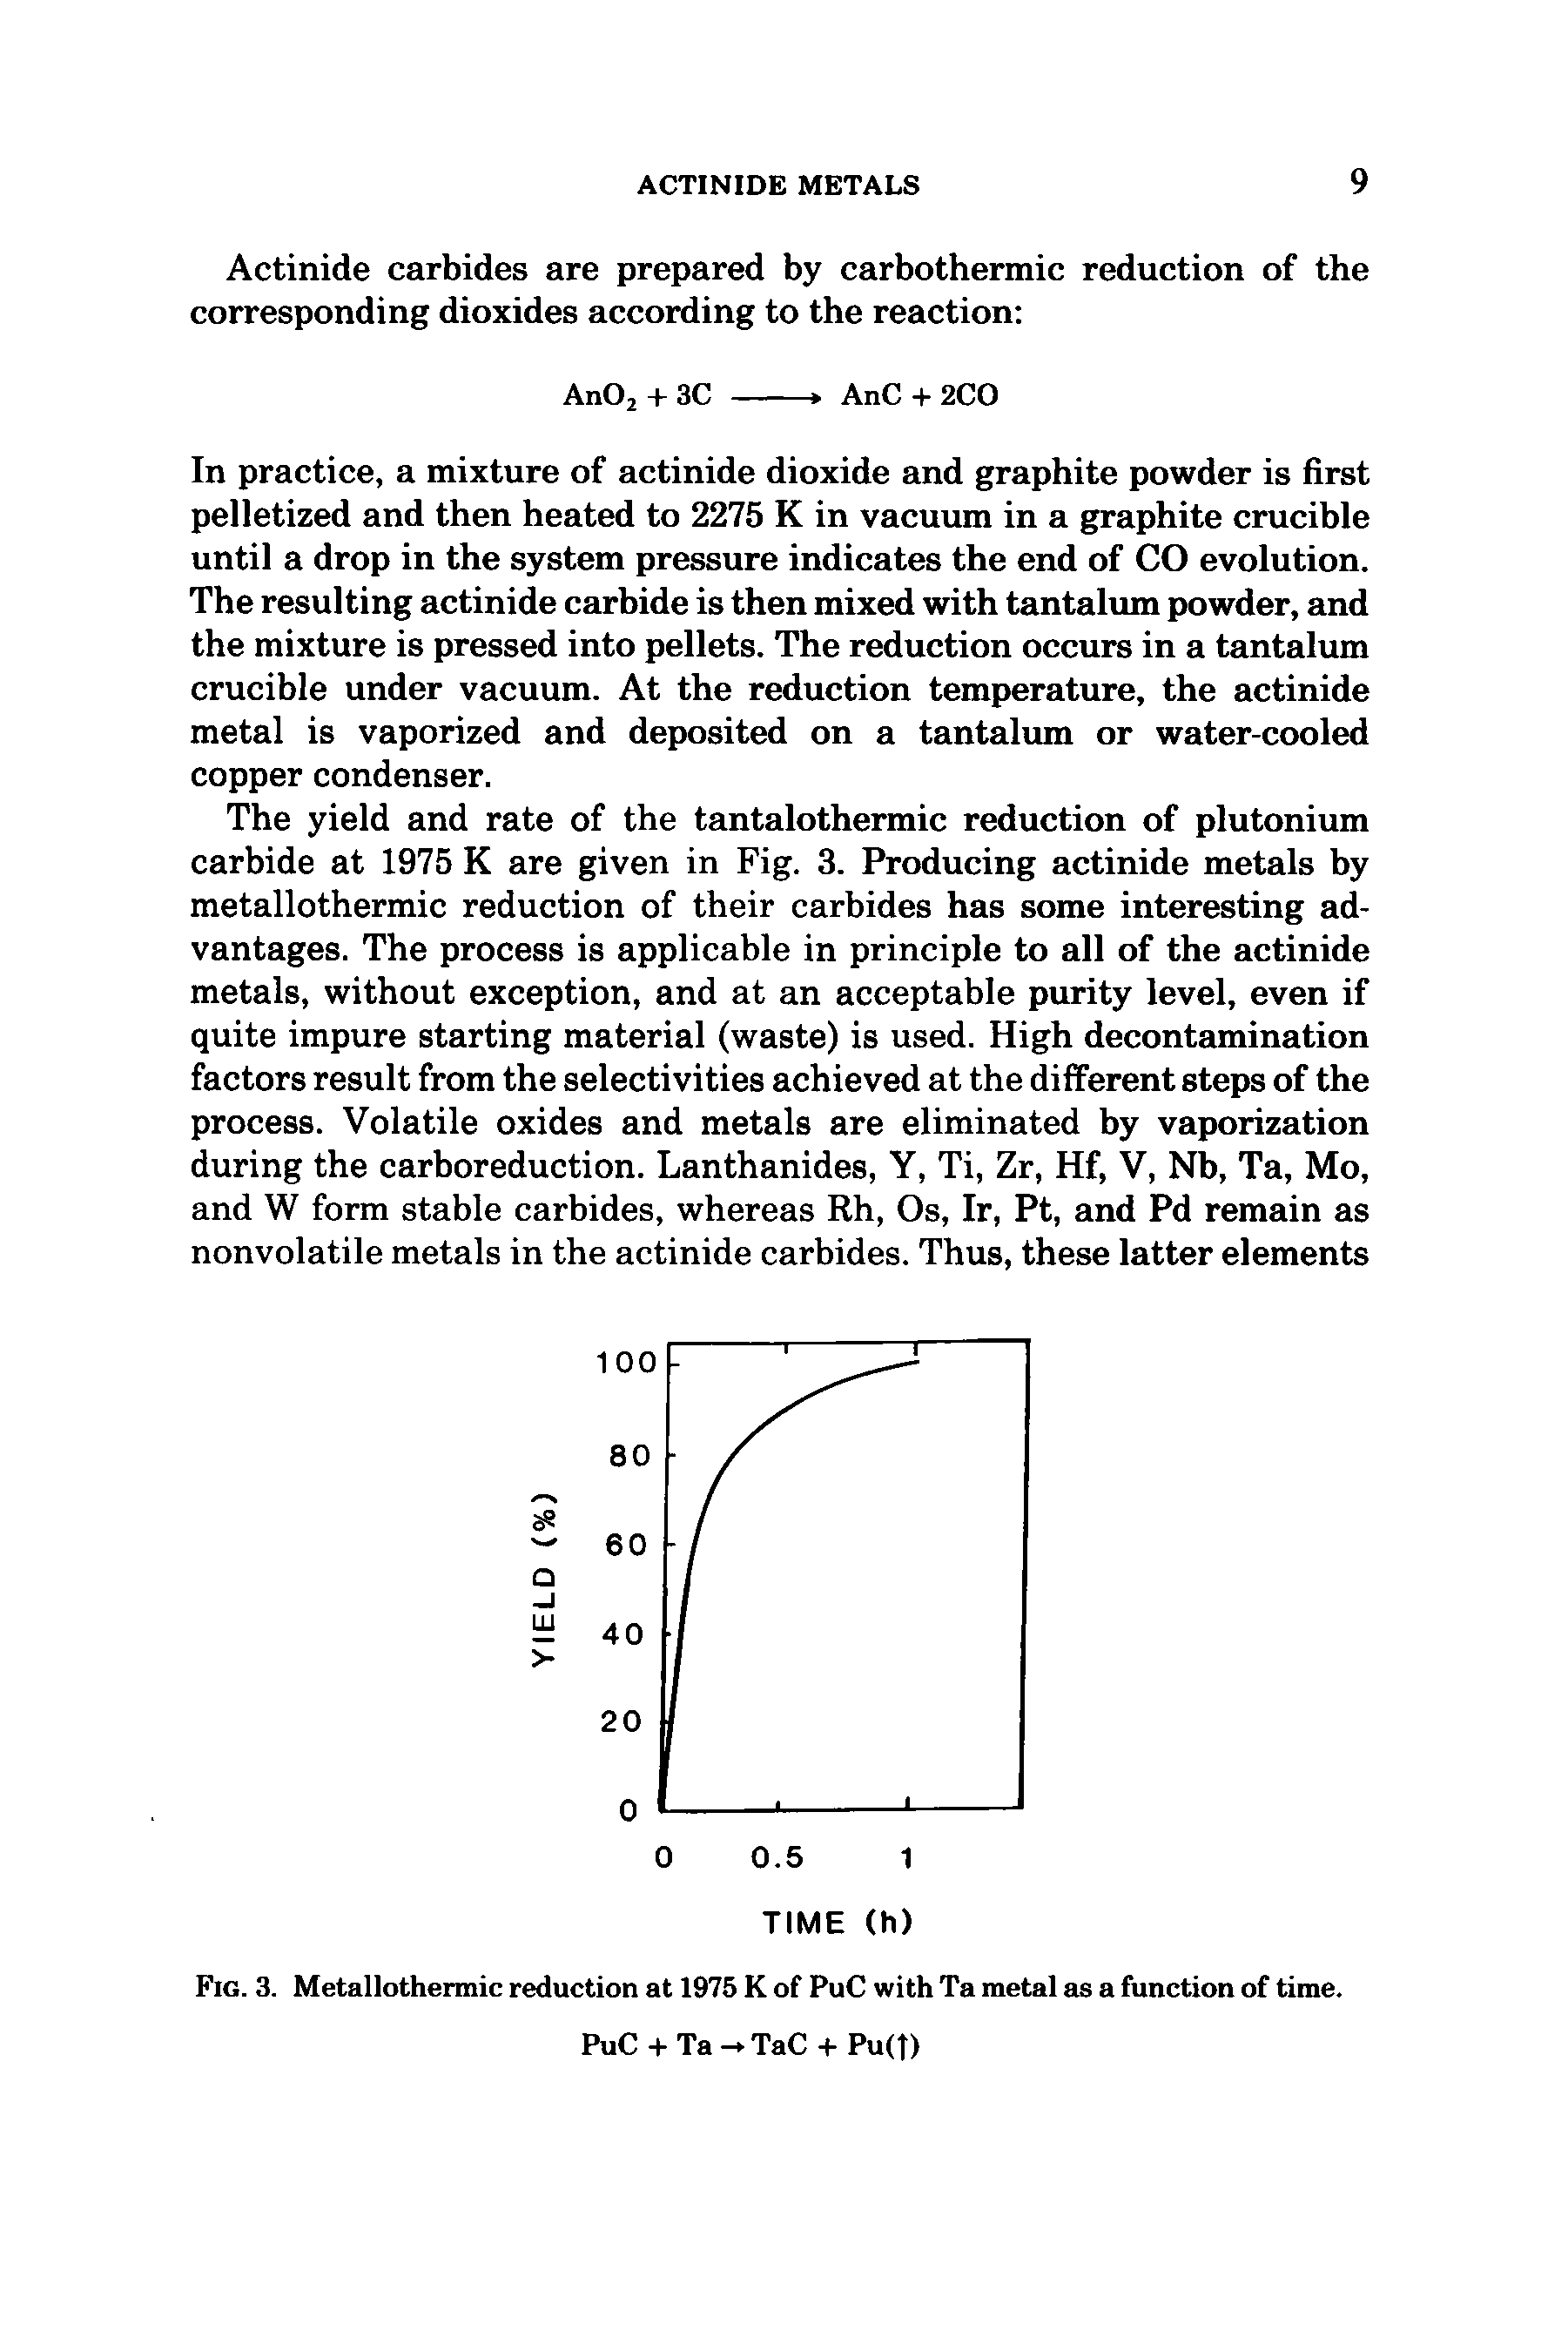 Fig. 3. Metallothermic reduction at 1975 K of PuC with Ta metal as a function of time. PuC-tTa-TaC + Pu(t)...